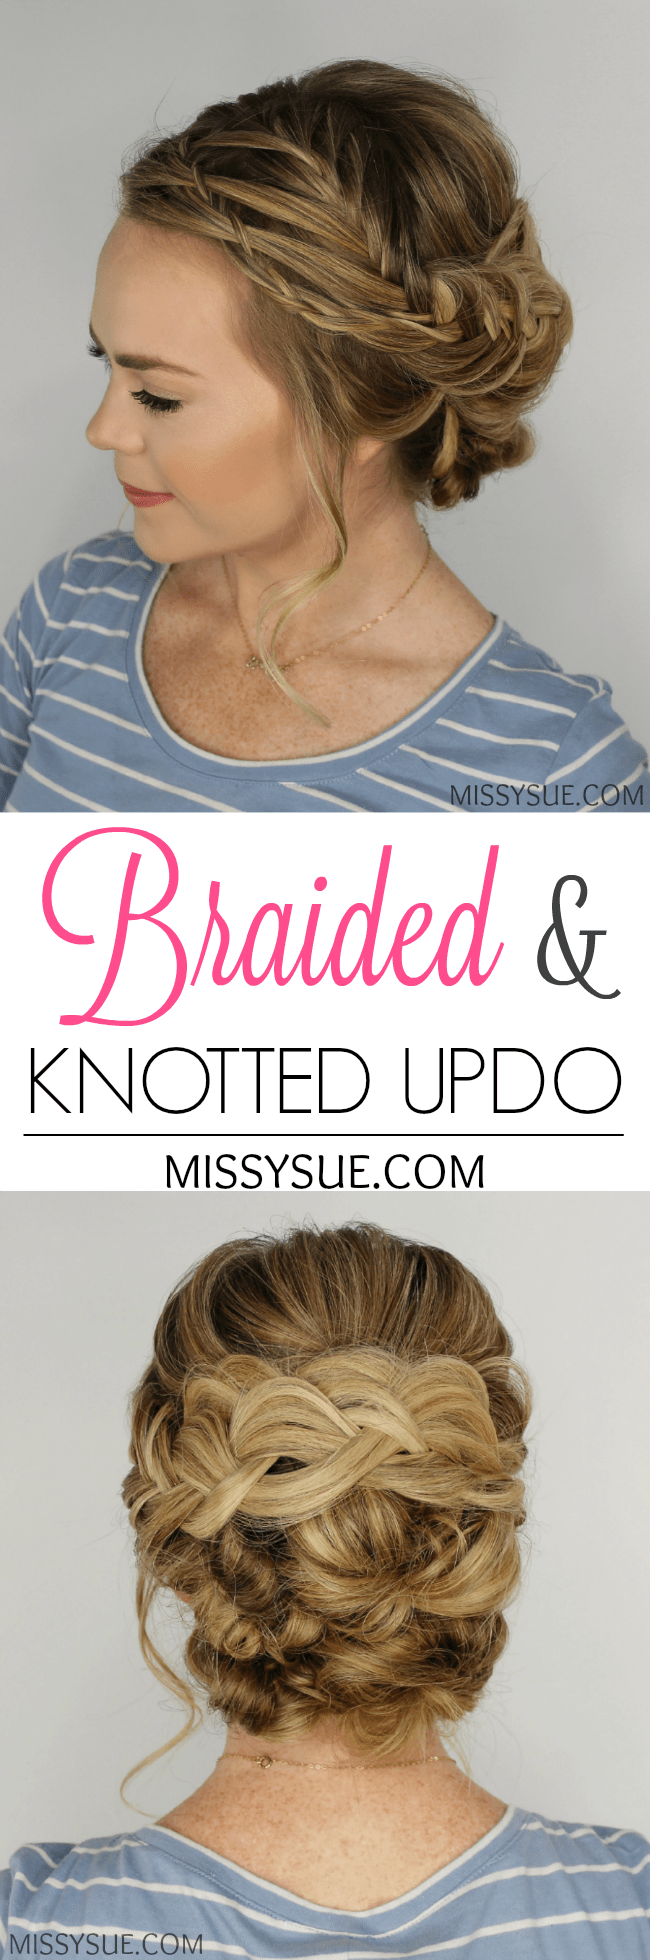 Braided and Knotted Updo | MISSYSUE.COM